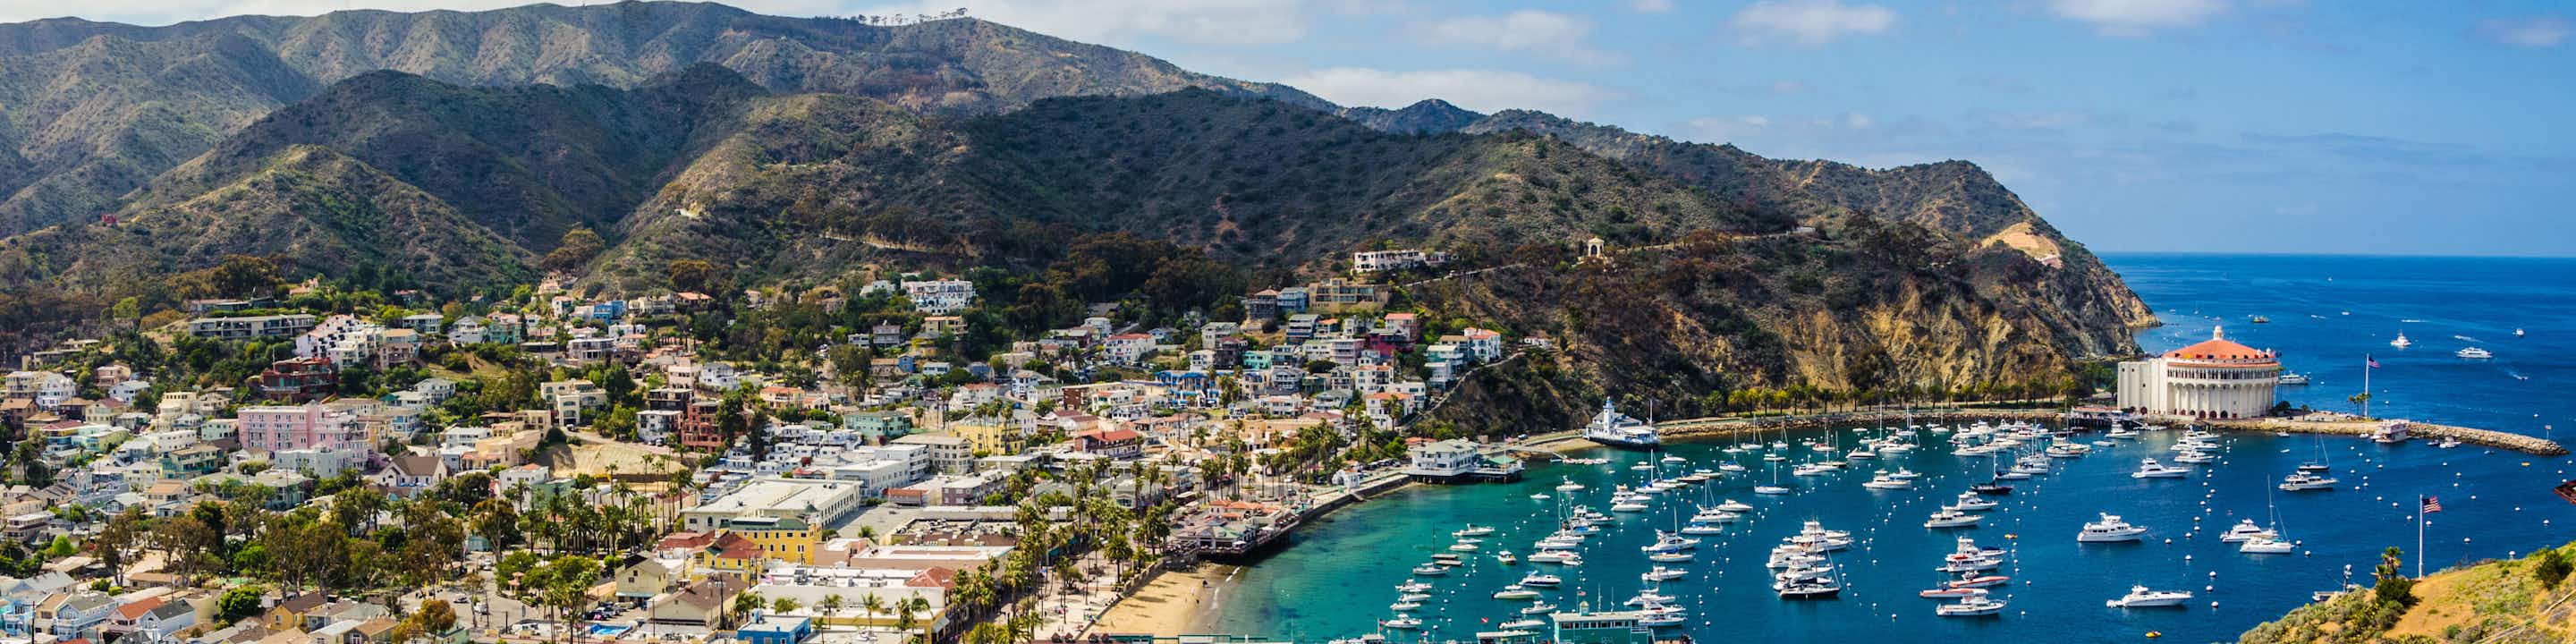 THE 16 BEST Cruises to Catalina Island, CA 2021 (with Prices